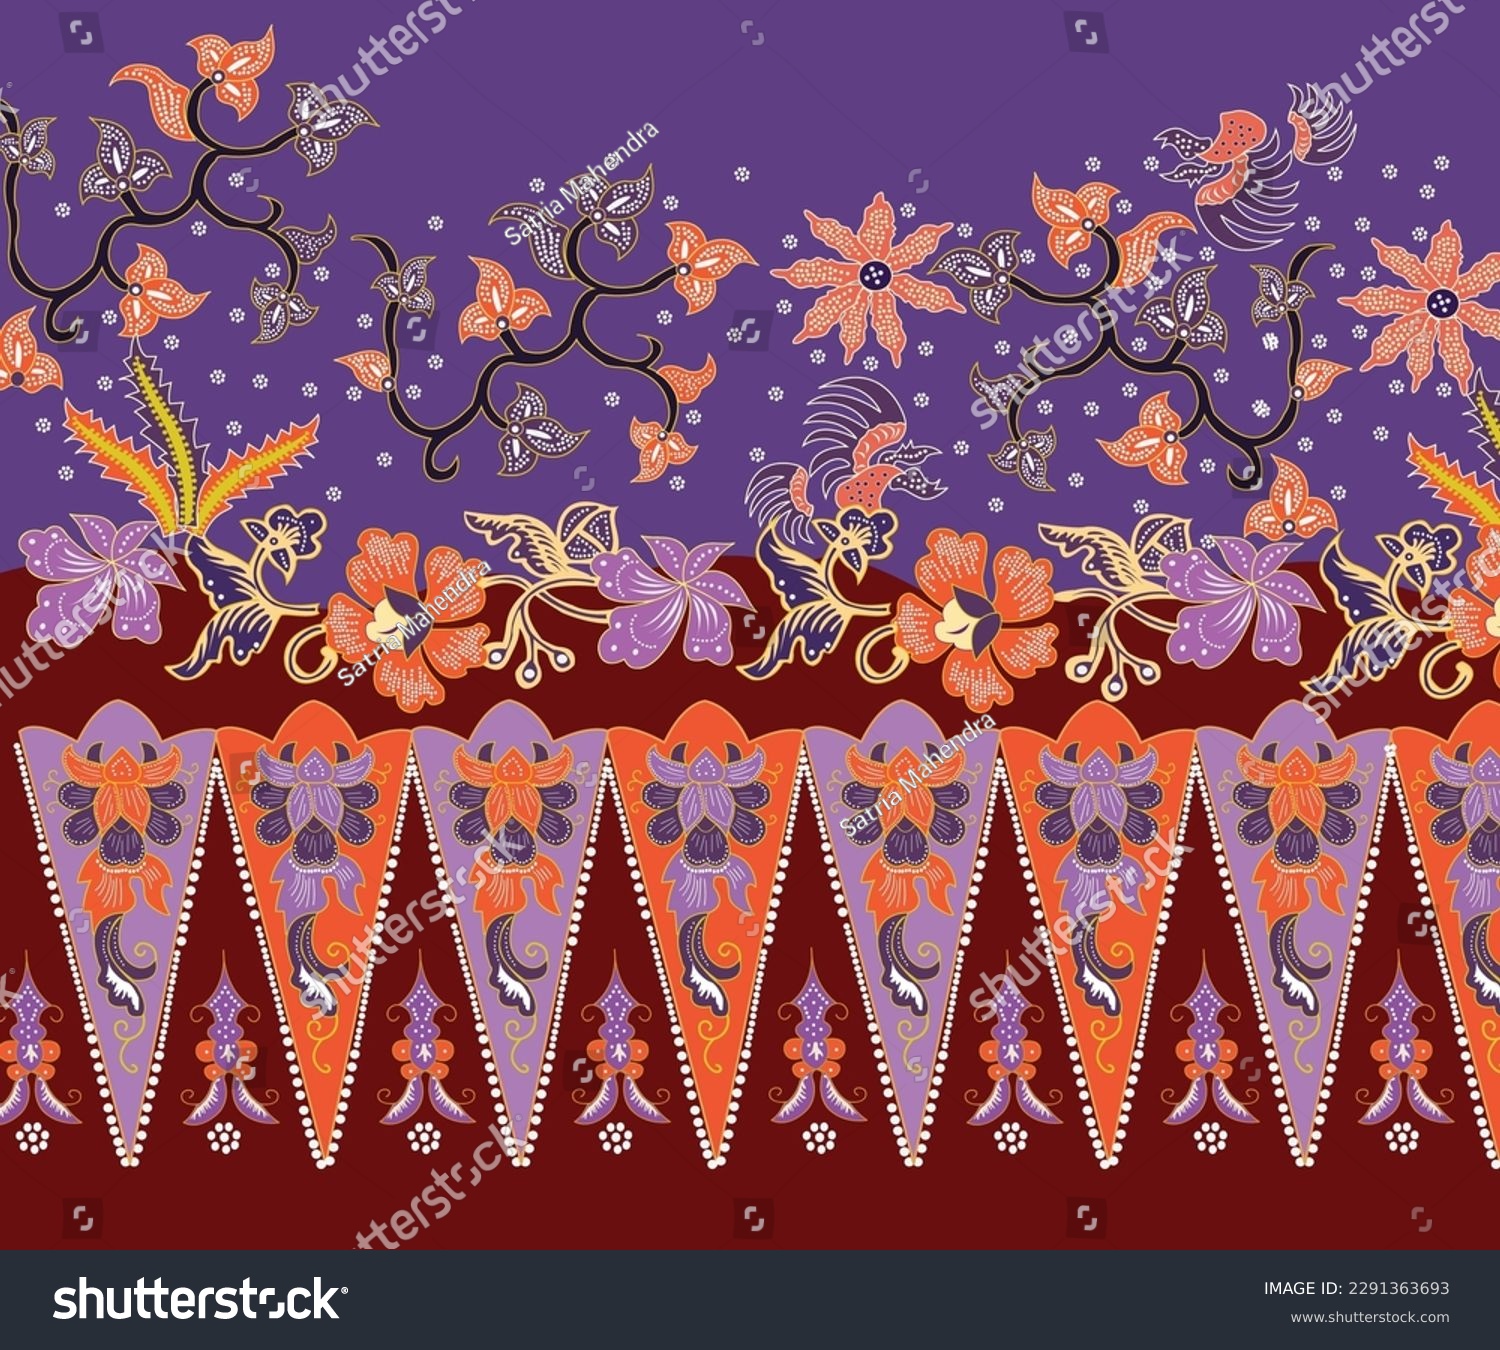 SVG of Pattern Batik Shoots of bamboo shoots Betawi cloth with floral motifs and very bright colors which are characteristic of Betawi svg